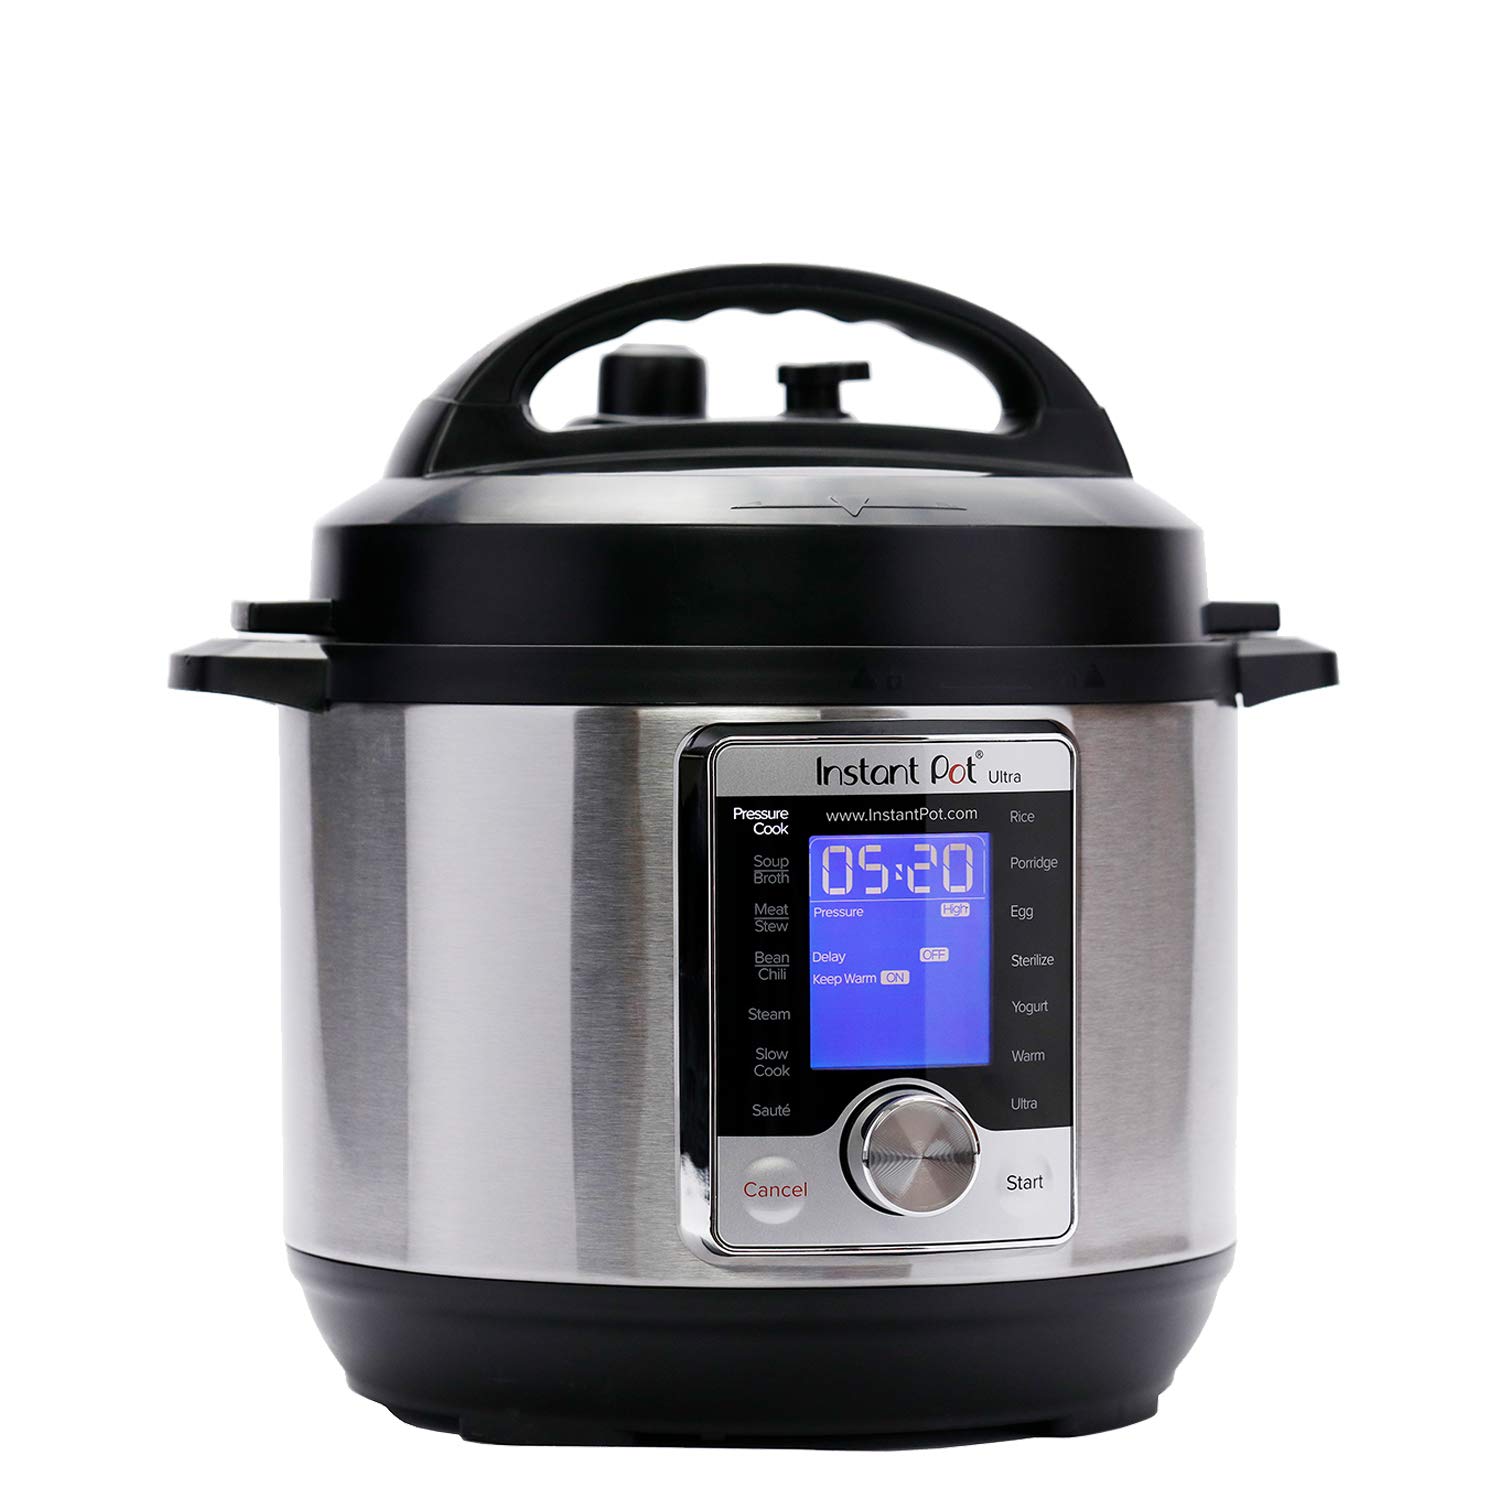 Instant Pot Ultra 3 quart is on sale on Amazon.